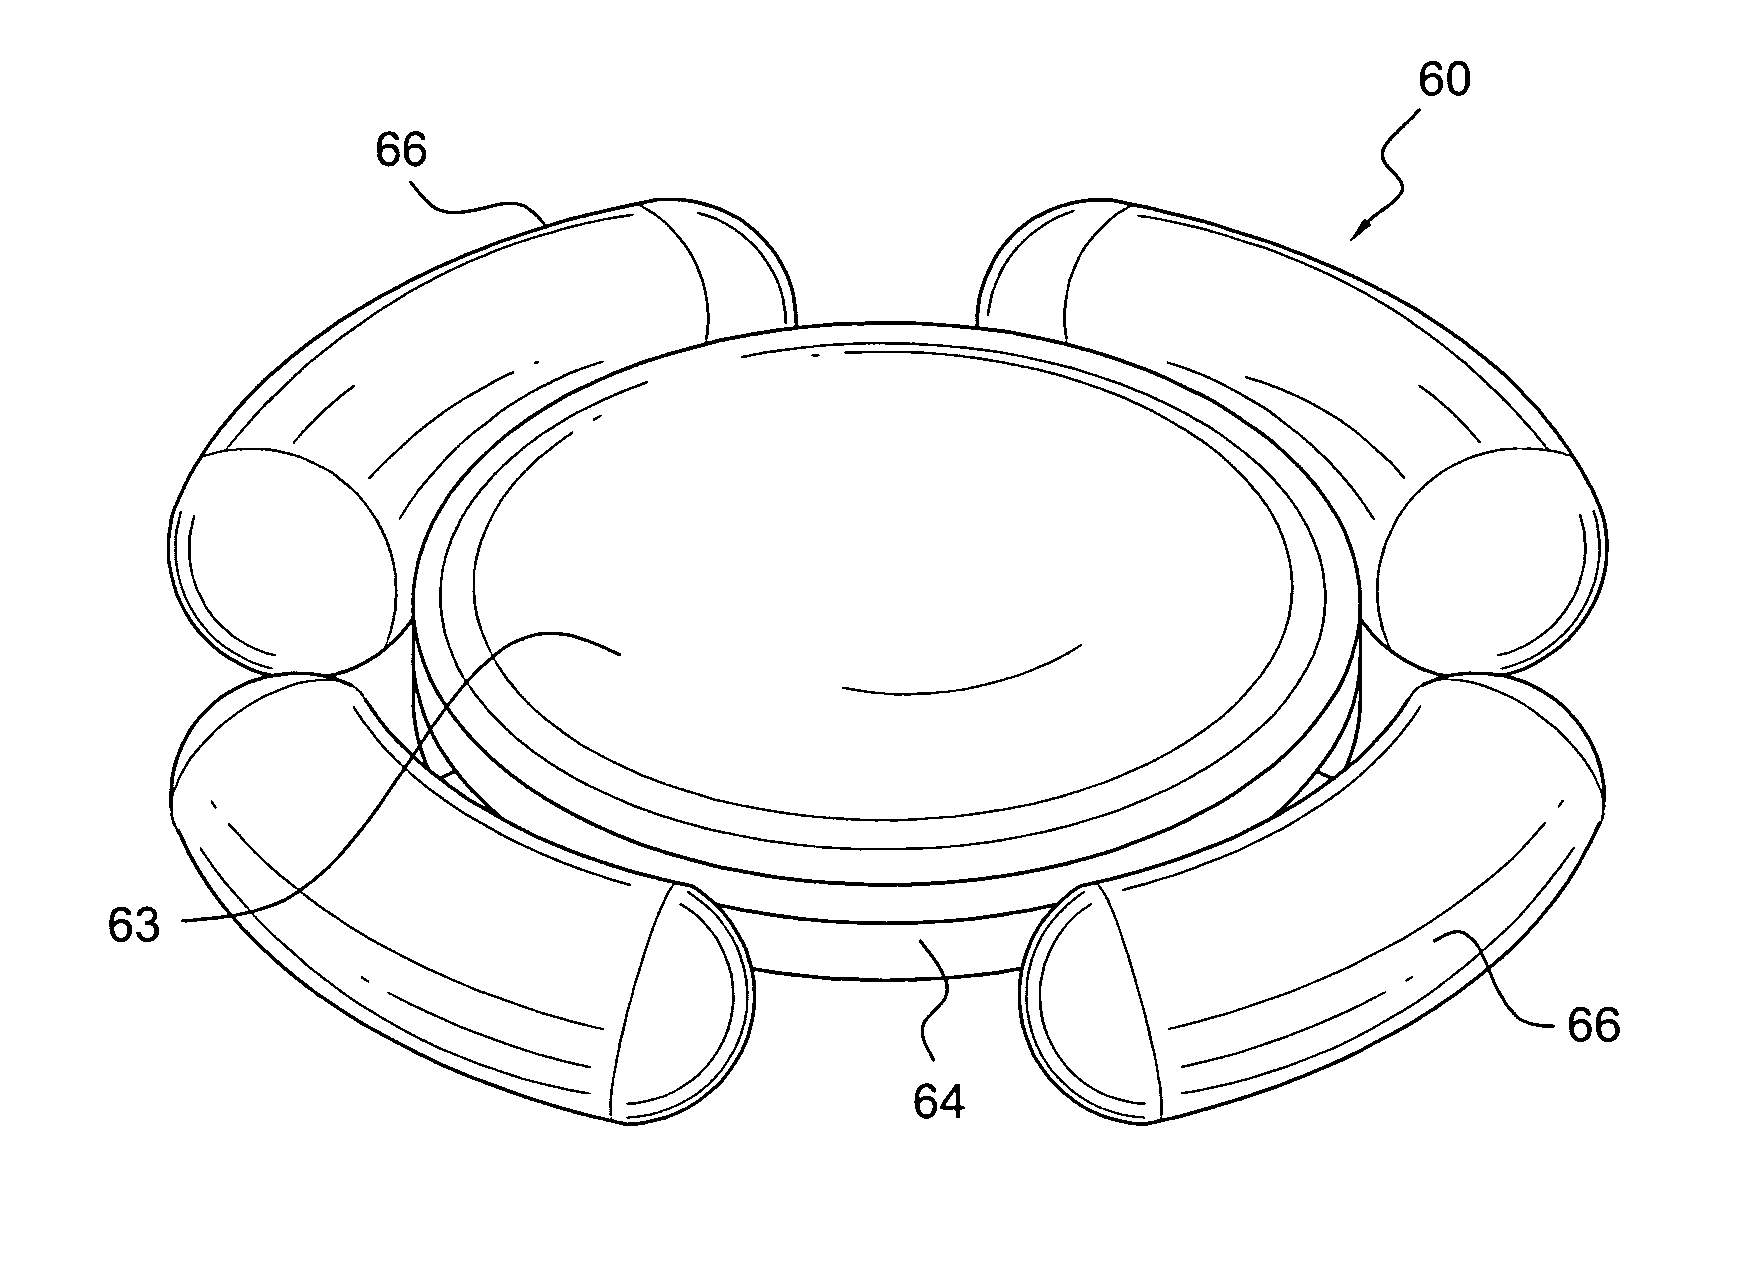 Accommodating intraocular lens having peripherally actuated deflectable surface and method